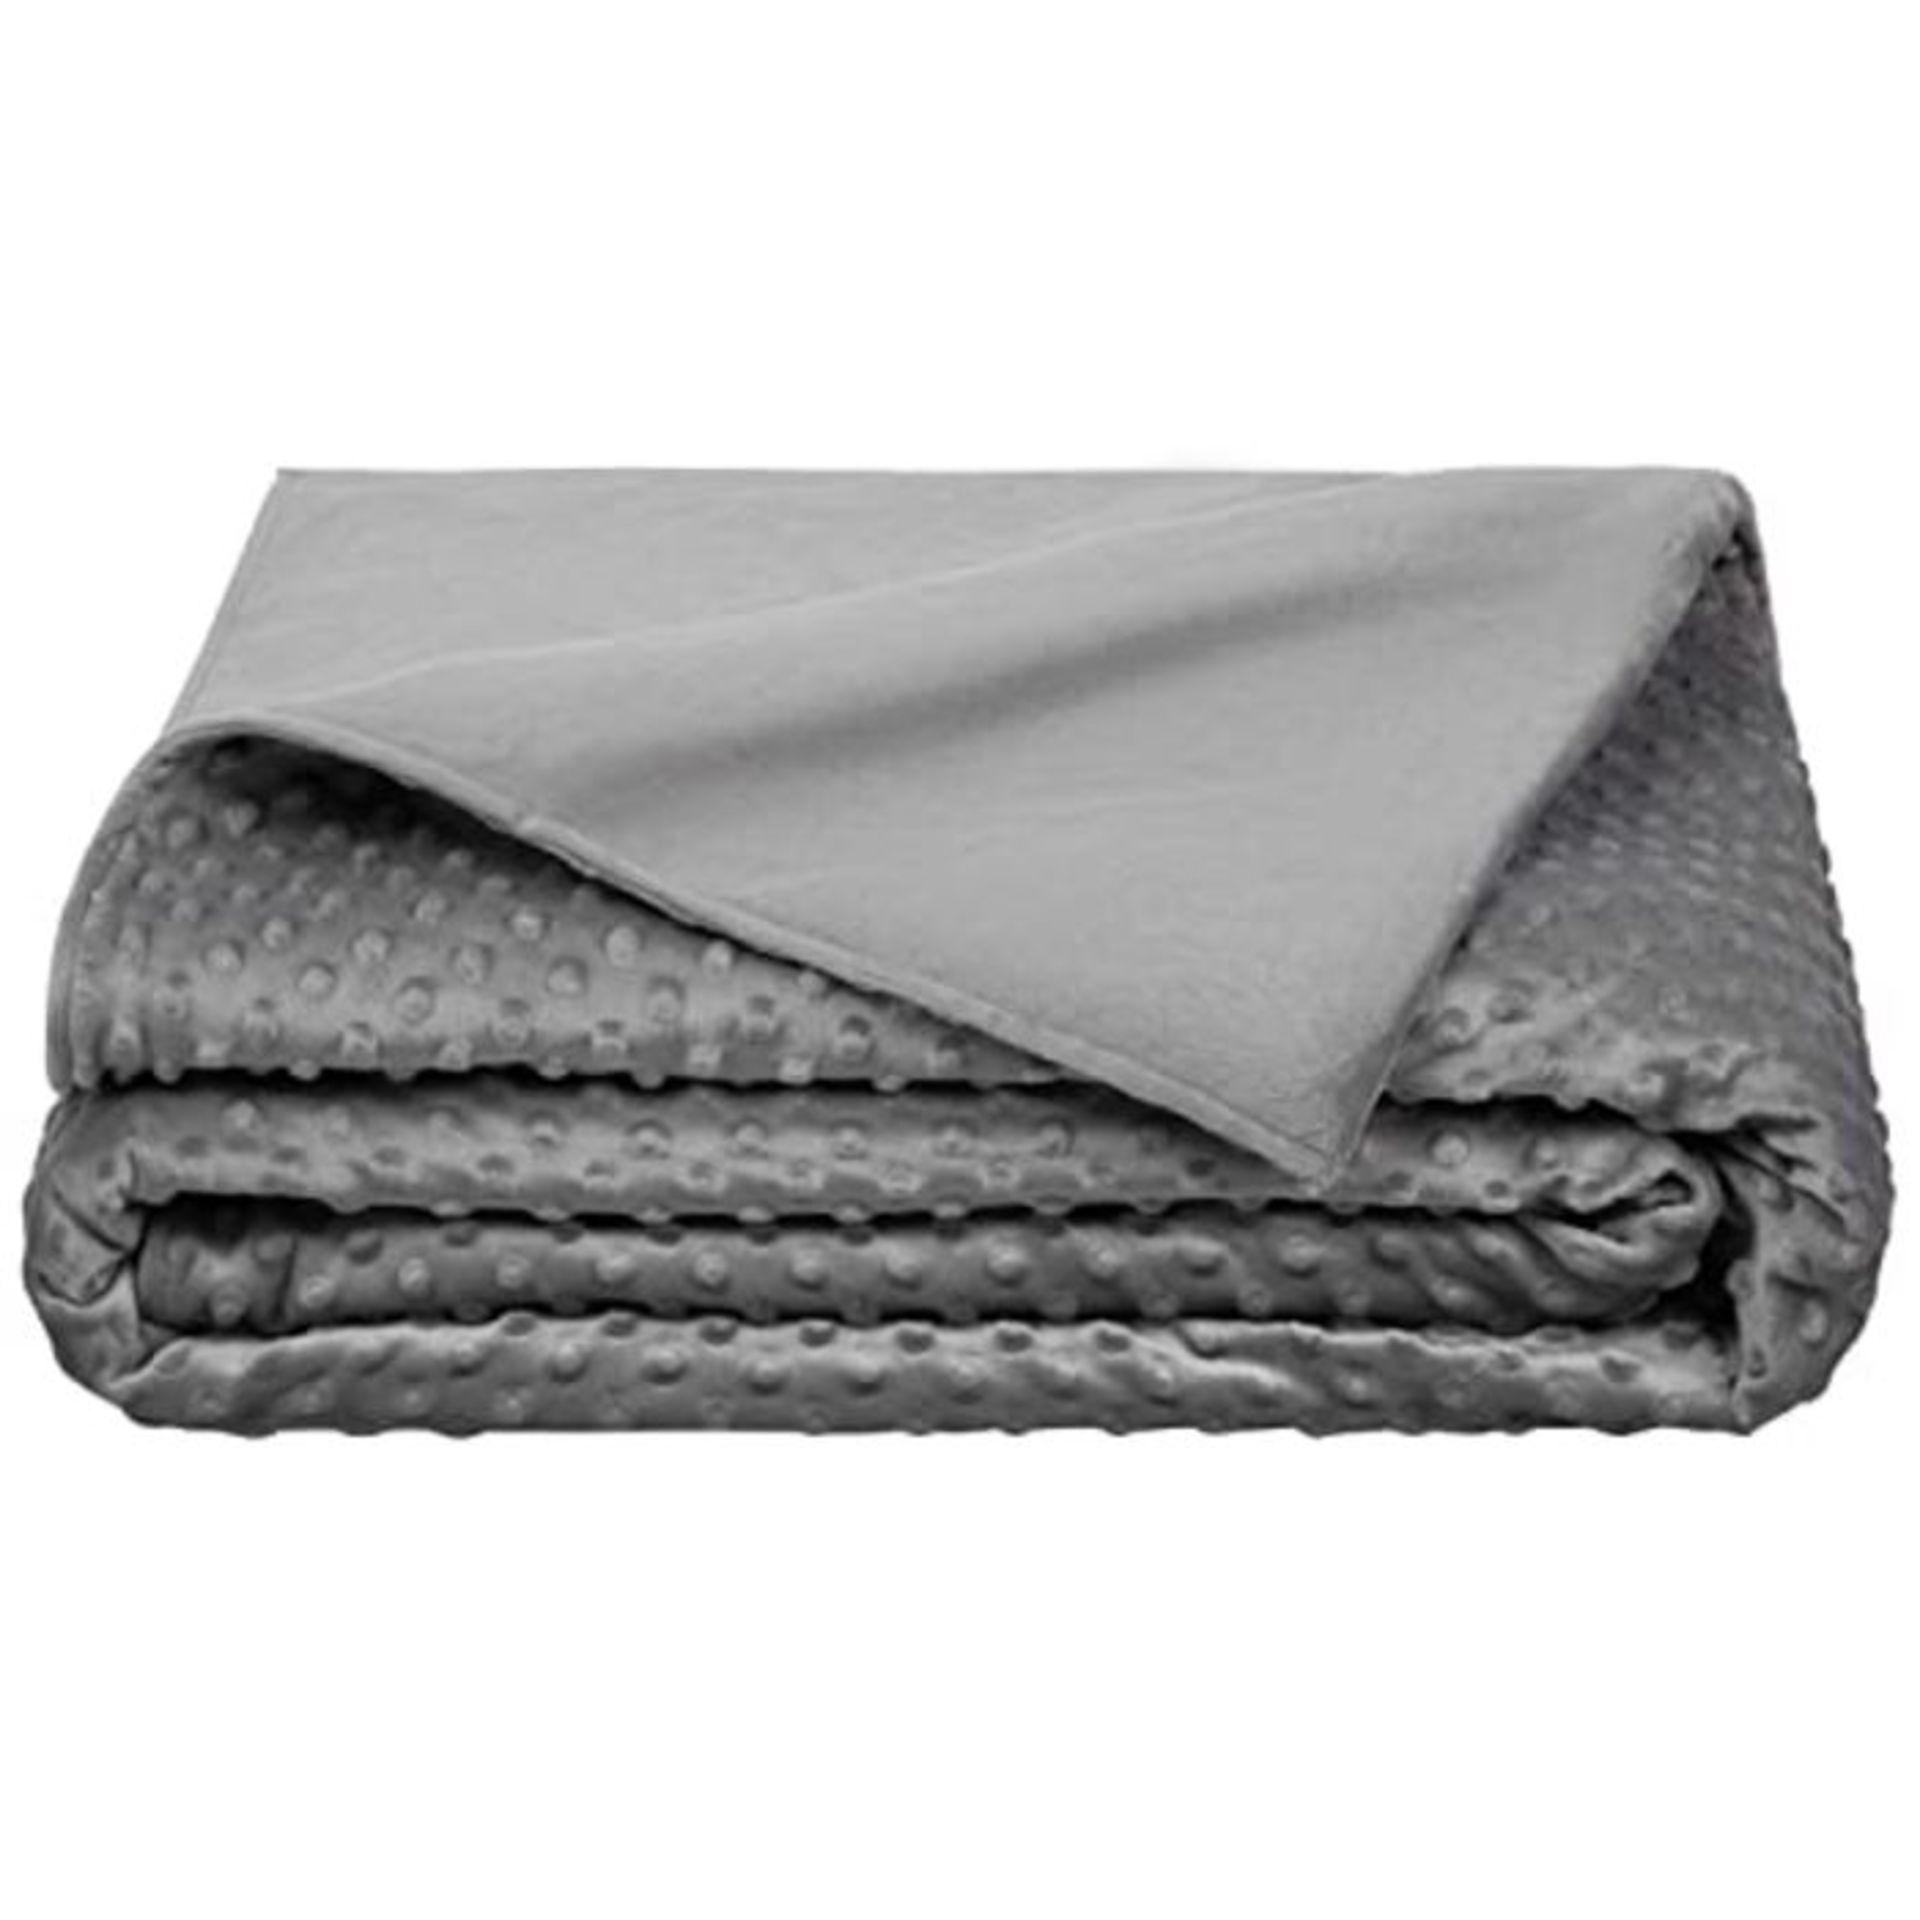 5 STARS UNITED Weighted Blanket Cover - Double 122 x 183 cm Grey - JUST COVER - Remova